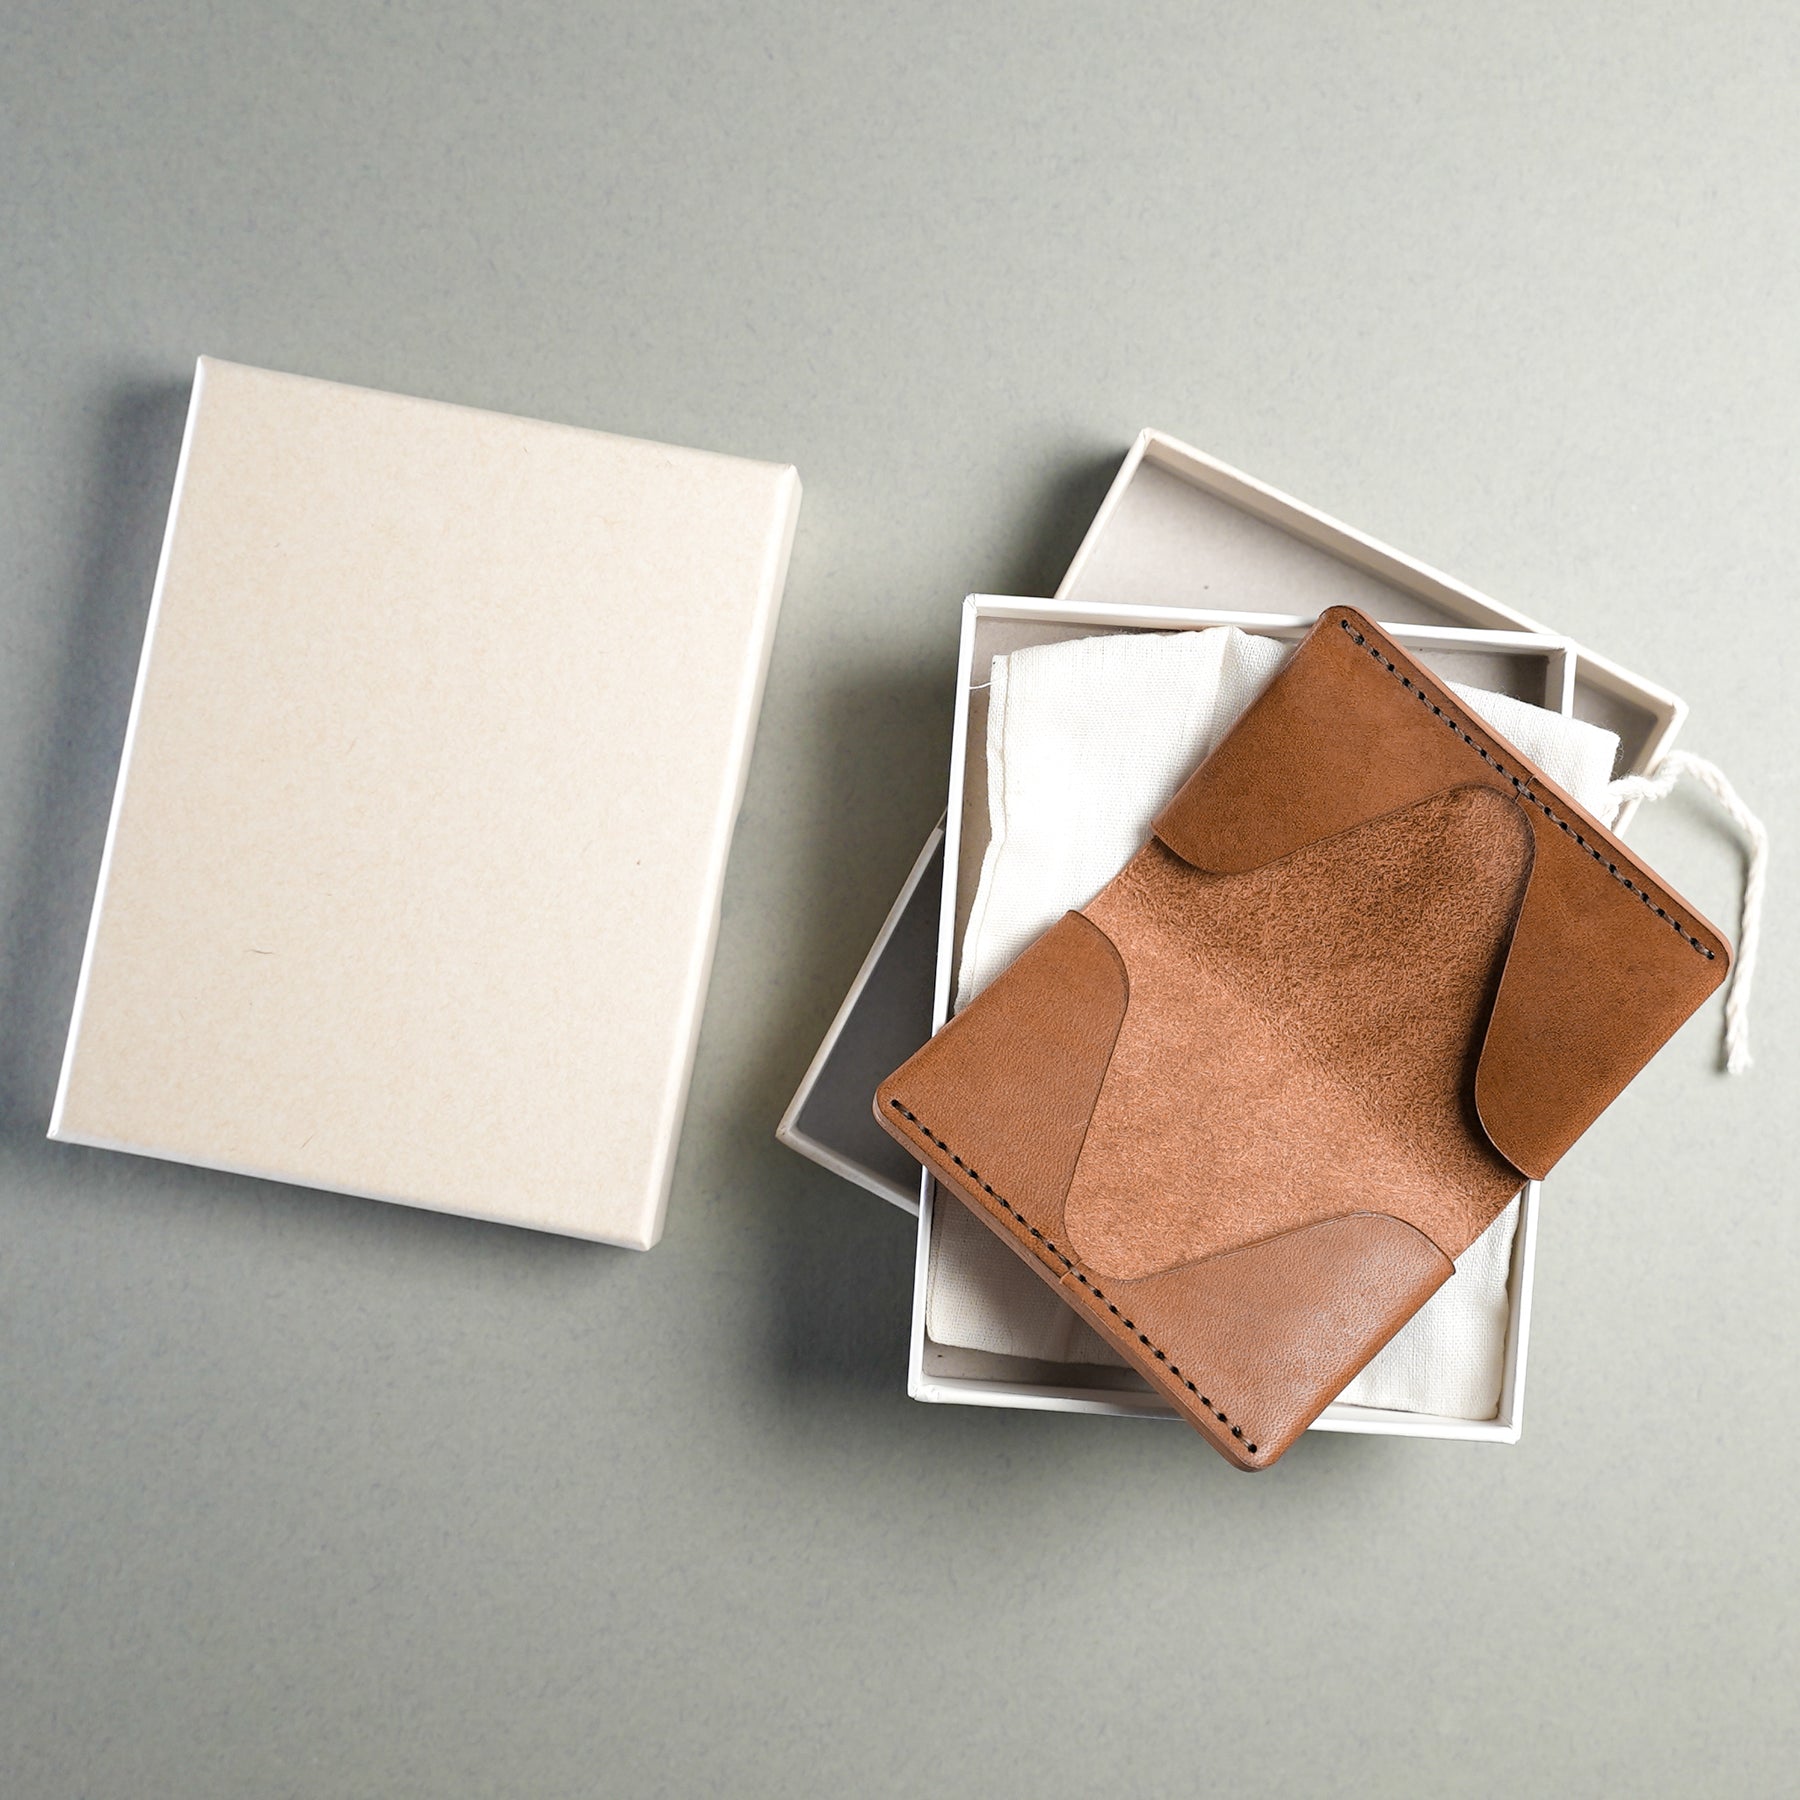 Ltd. Ed. Handmade Rye Wickett Leather Slip Wallet  Sustainable,  Eco-friendly and Zero-waste products